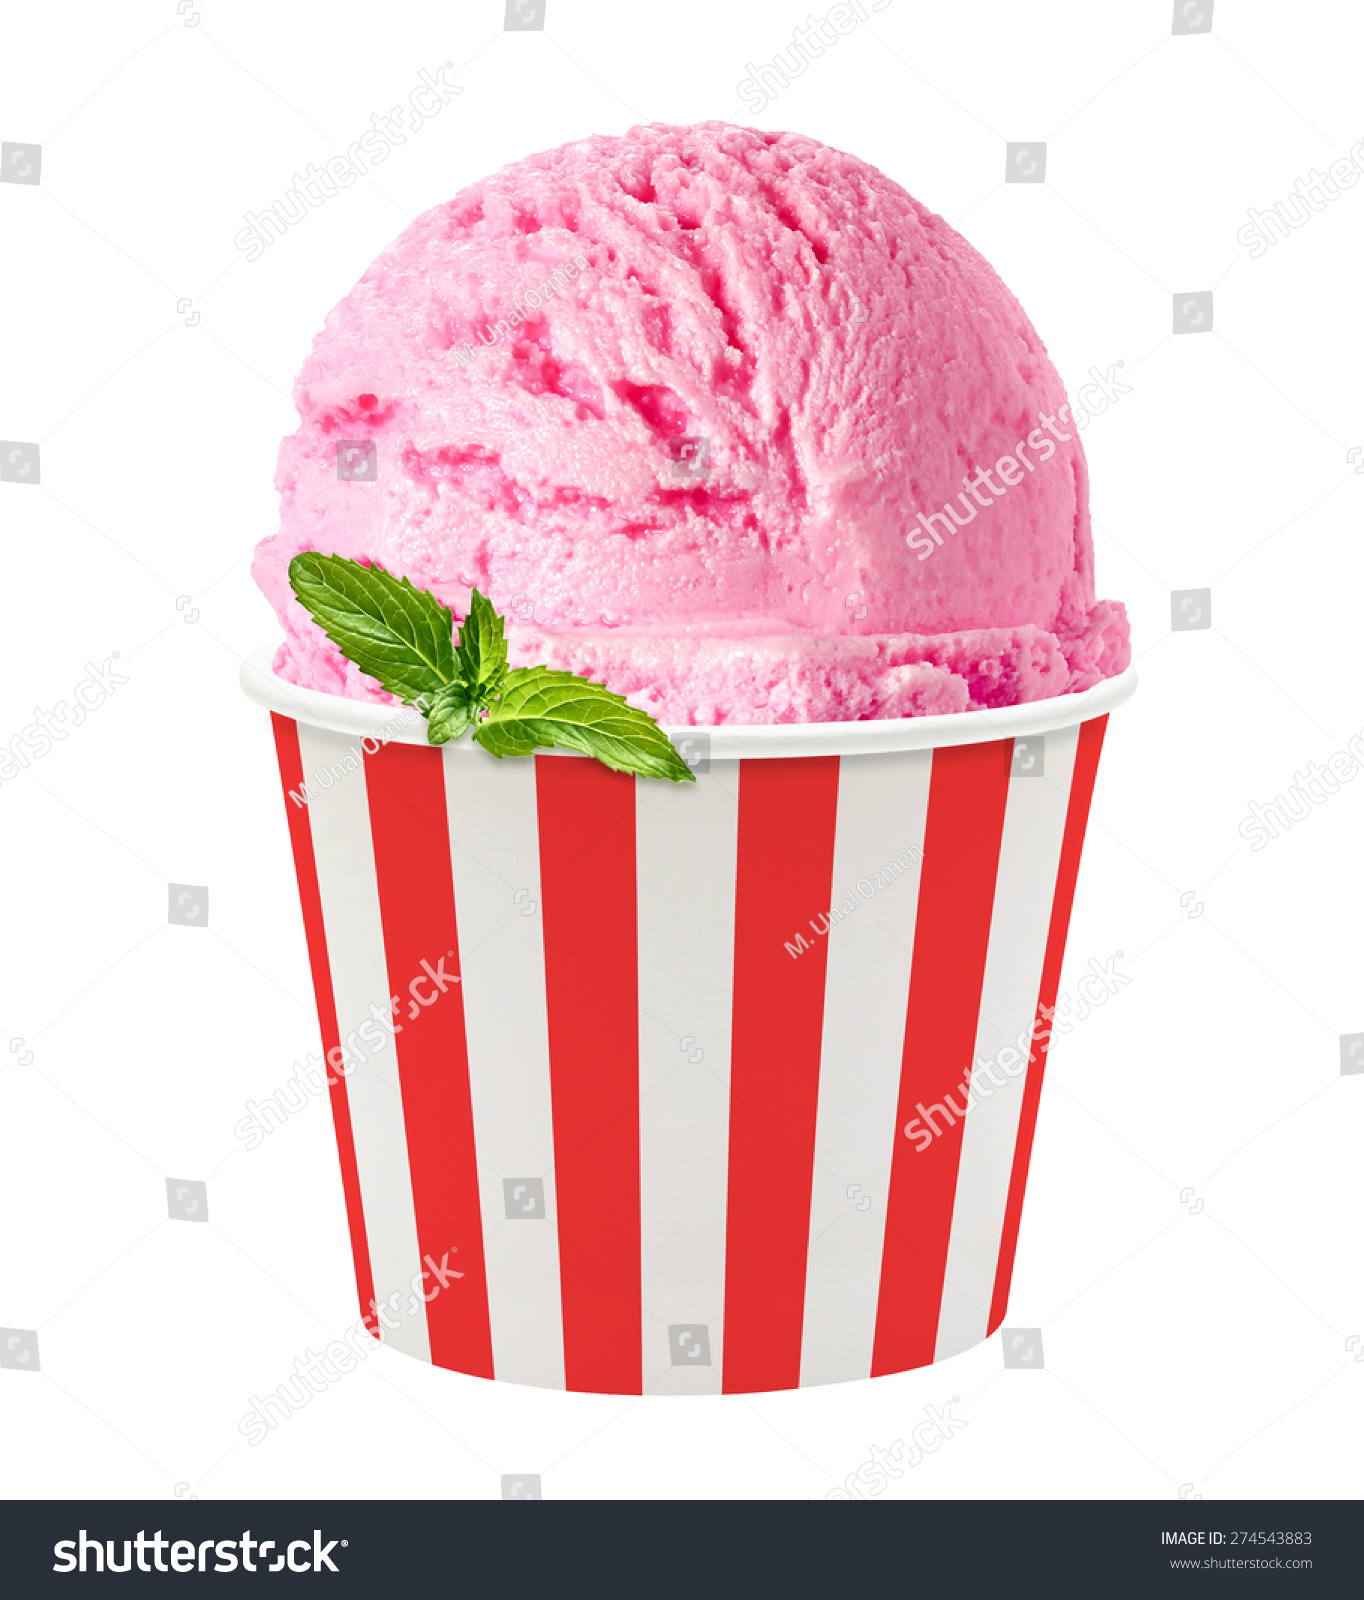 Download Strawberry Ice Cream Scoop Striped Paper Stock Photo Edit Now 274543883